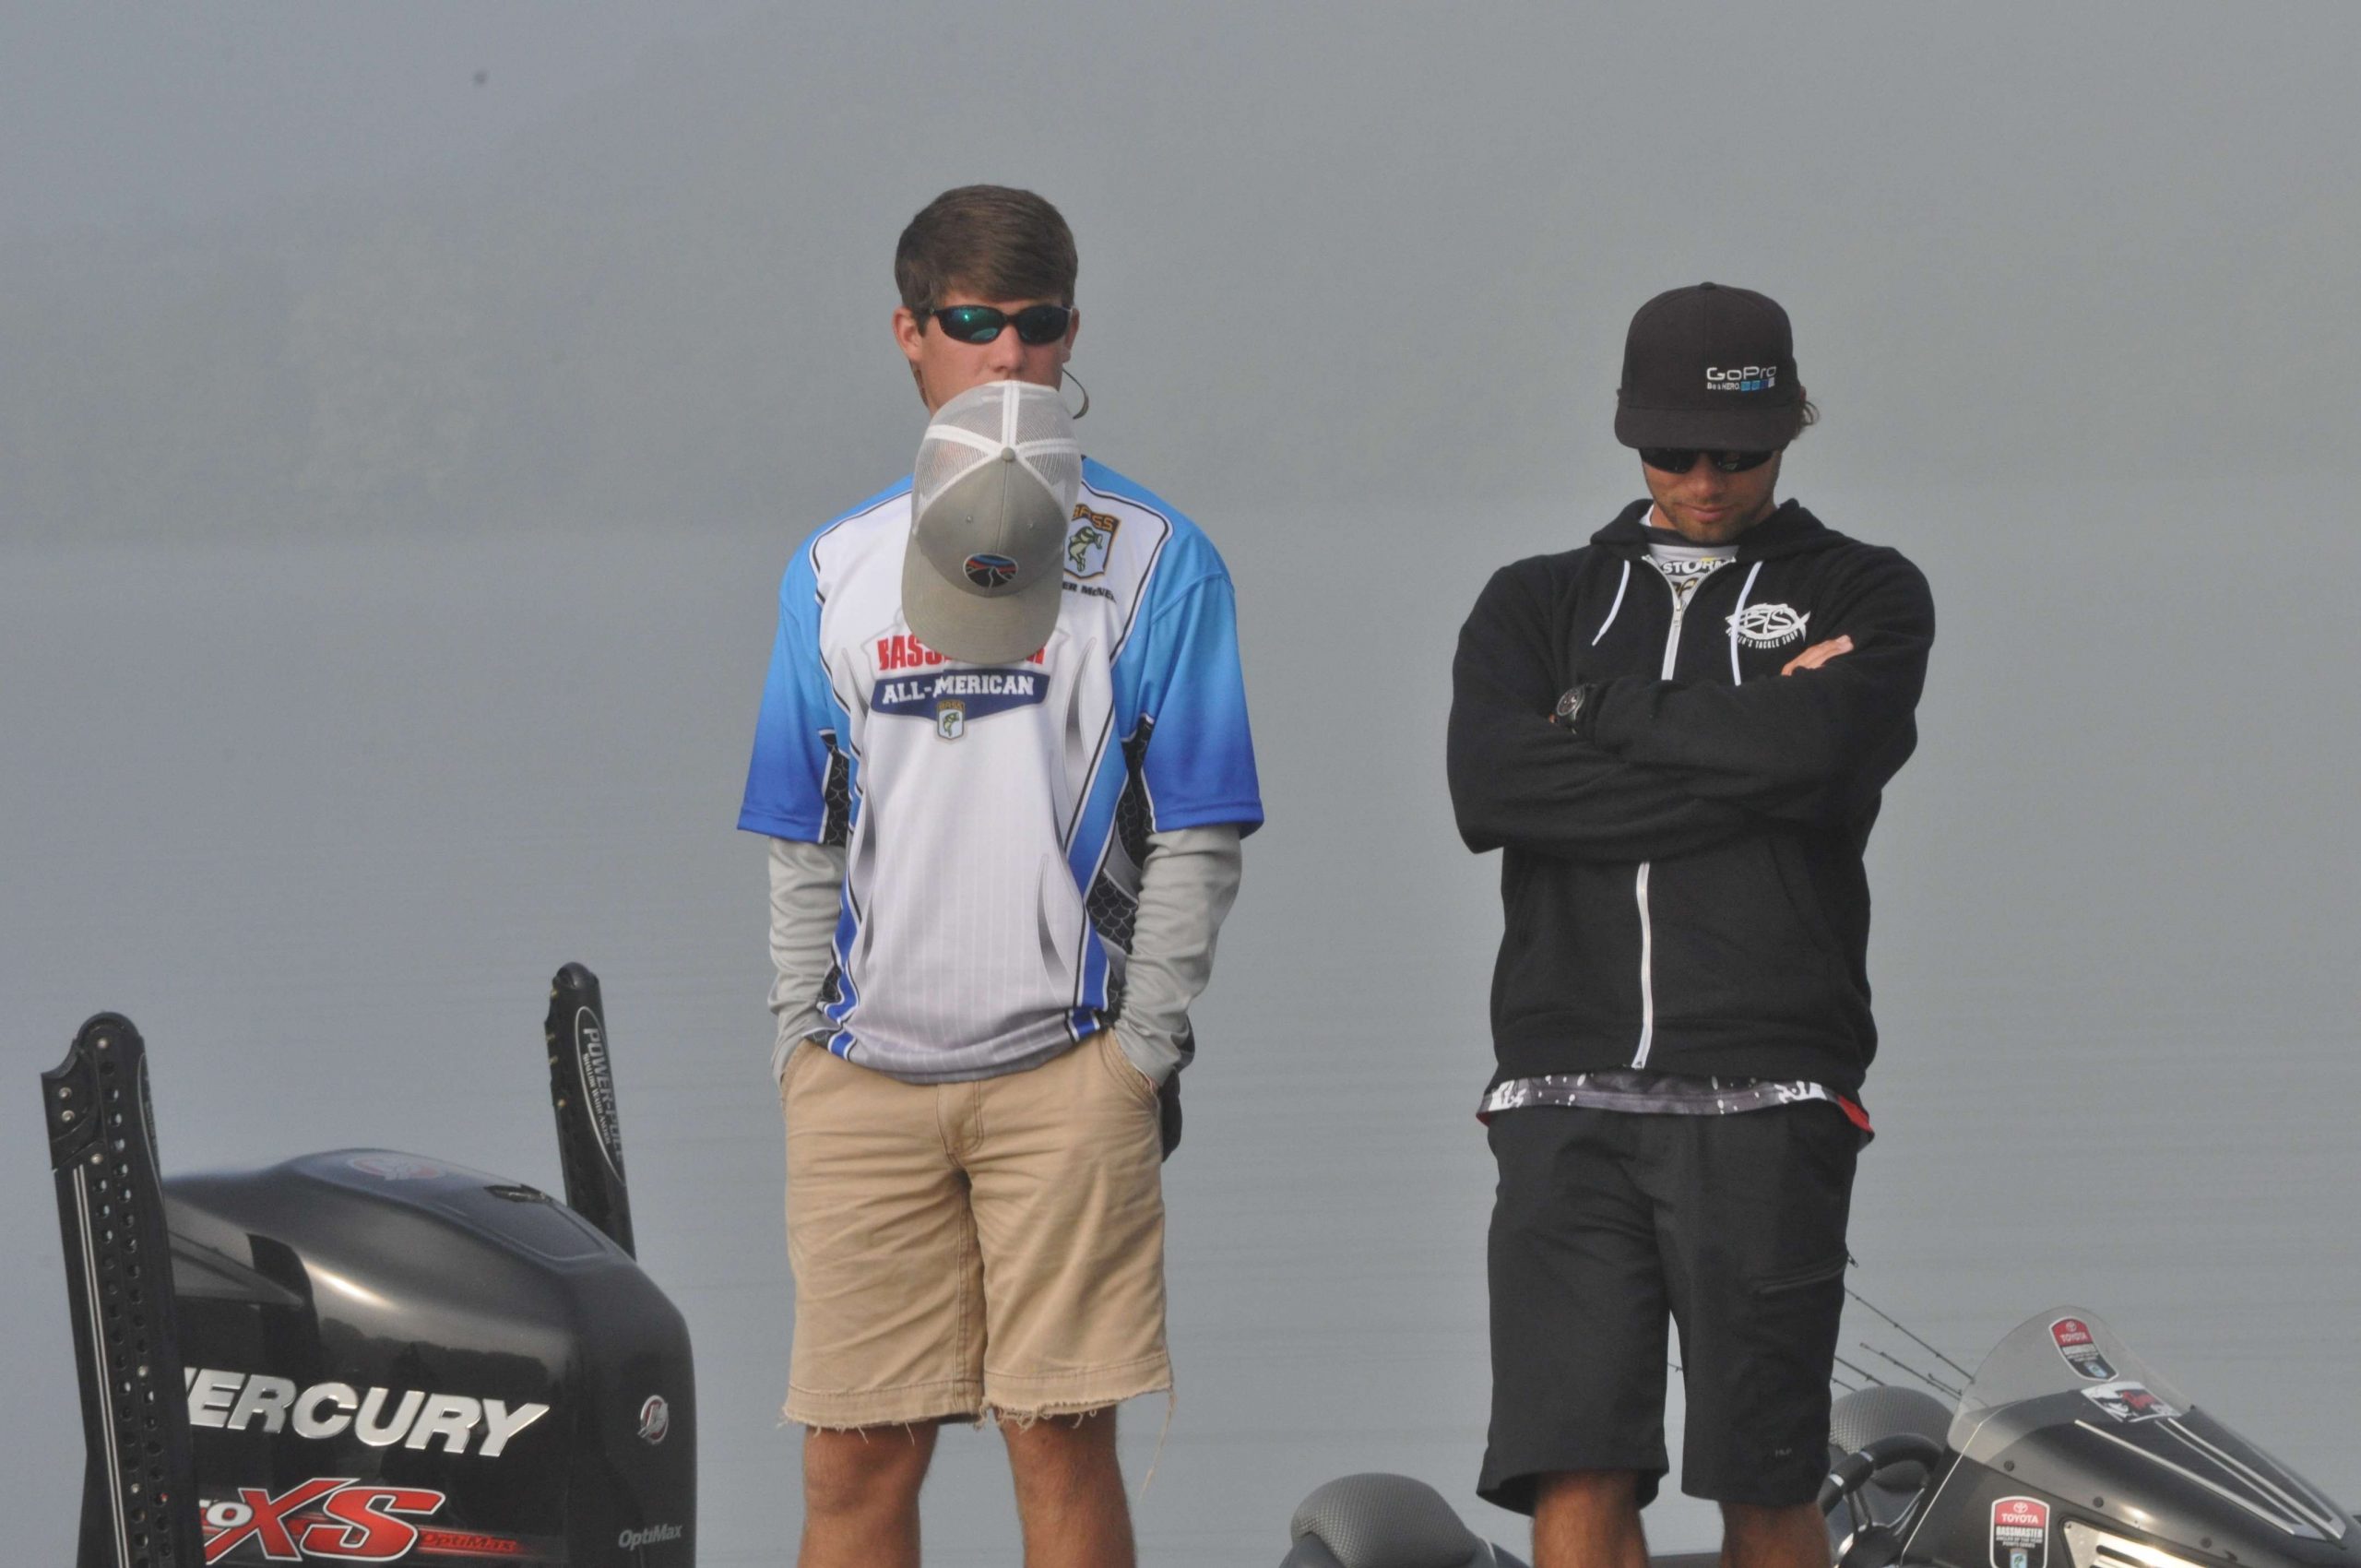 Carter McNeil was chomping at the bit to get on the water with his pro, Brandon Palaniuk.